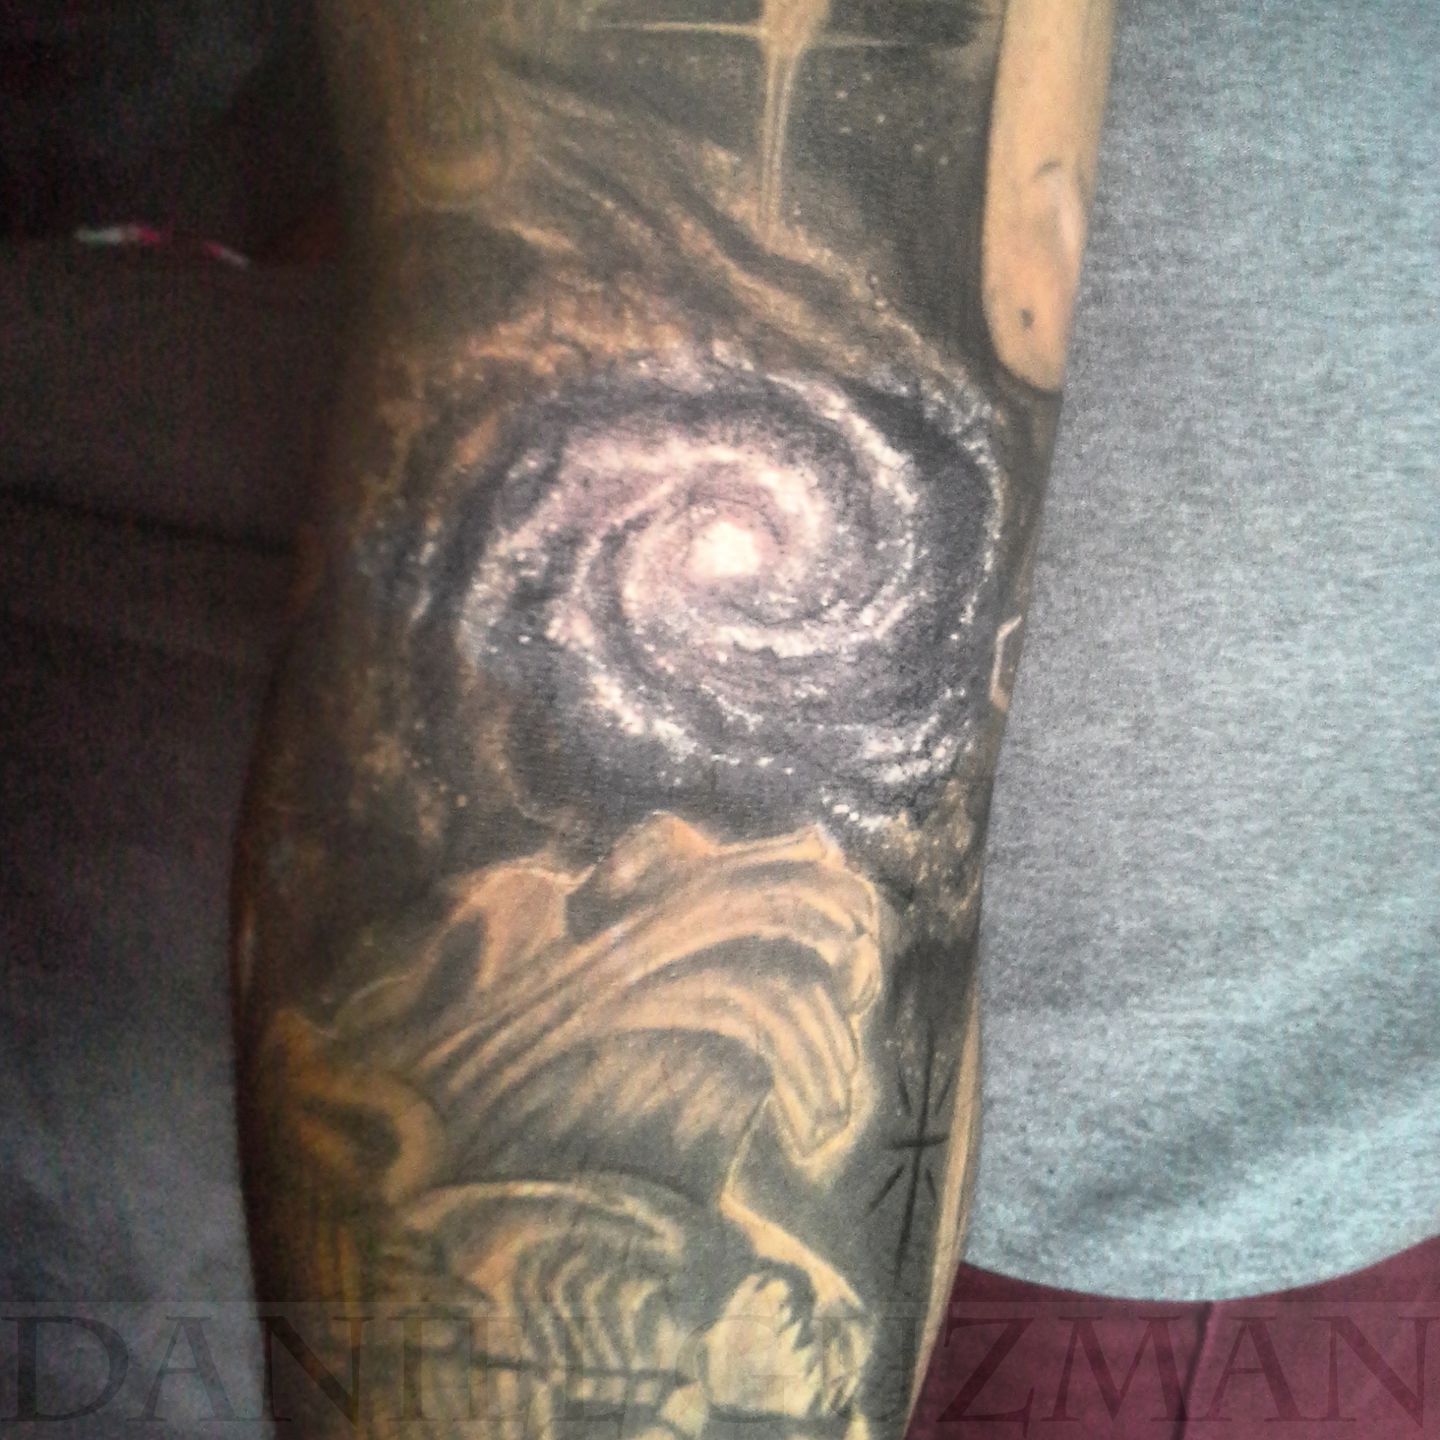 Best 128 Galaxy Tattoos You Can Find  Pick From Billions of Stars